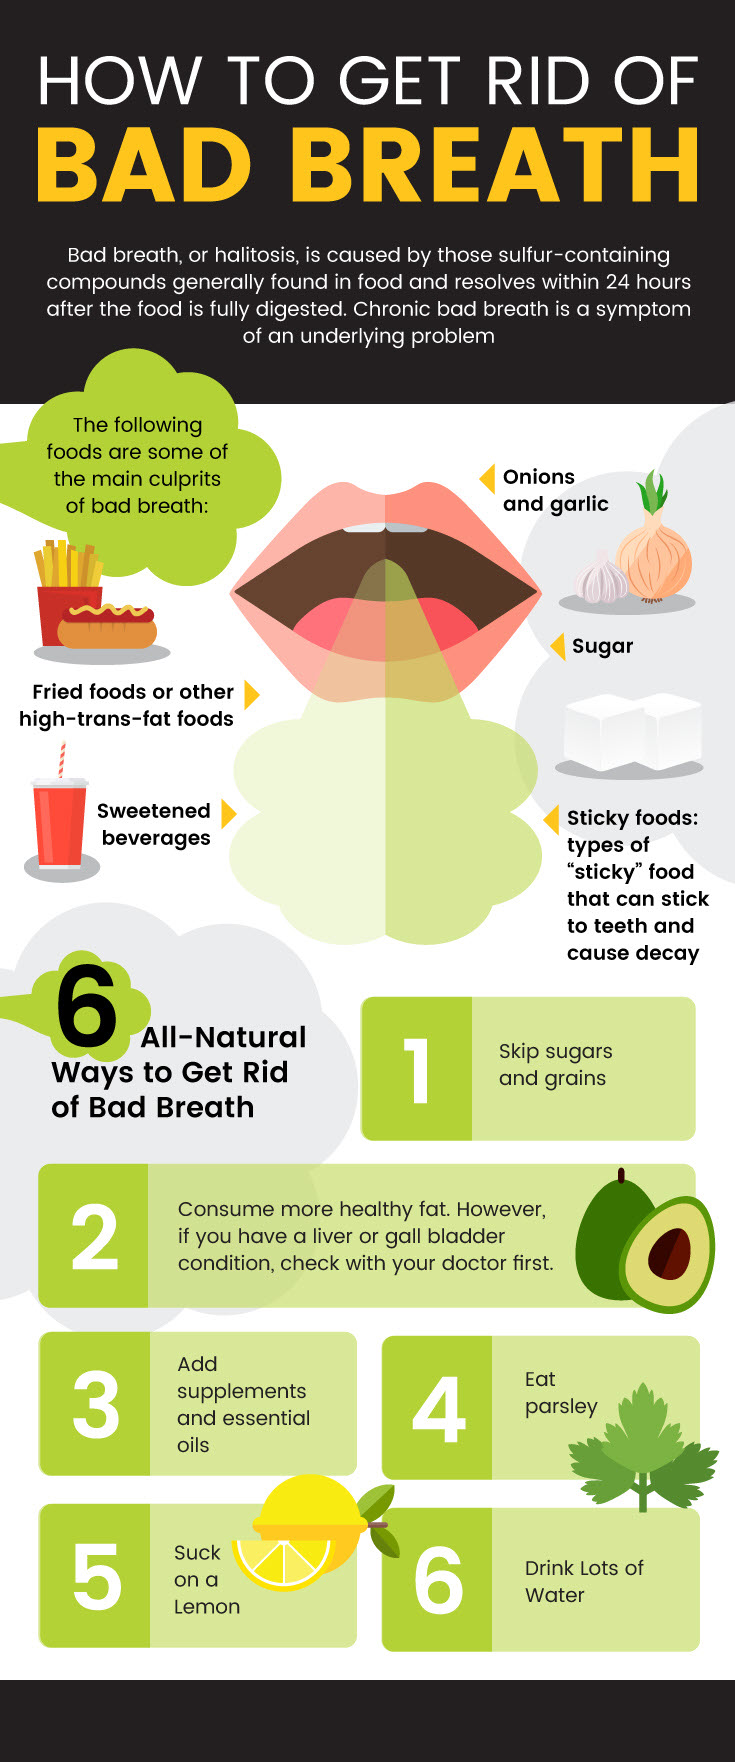 How to get rid of bad breath: 6 natural ways - MKexpress.net